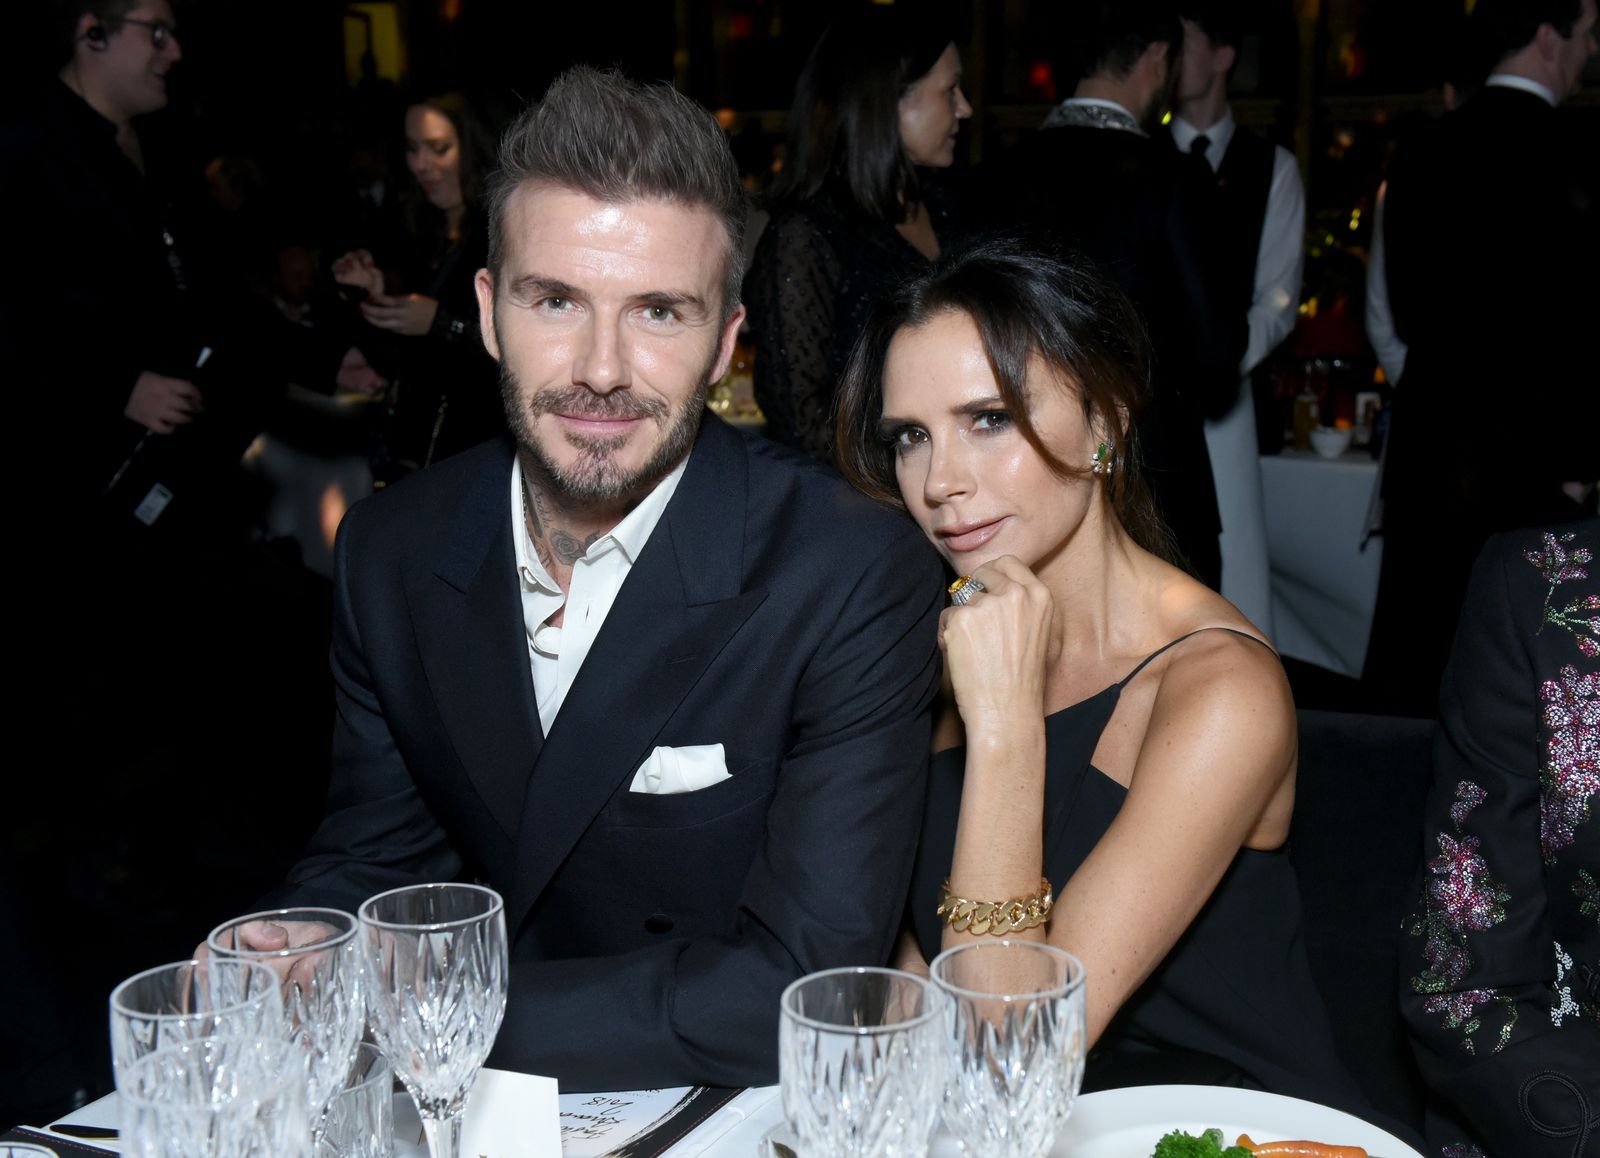 David Beckham and Victoria Beckham at The Fashion Awards 2018 In Partnership With Swarovski at Royal Albert Hall on December 10, 2018 in London, England. | Photo: Getty Images